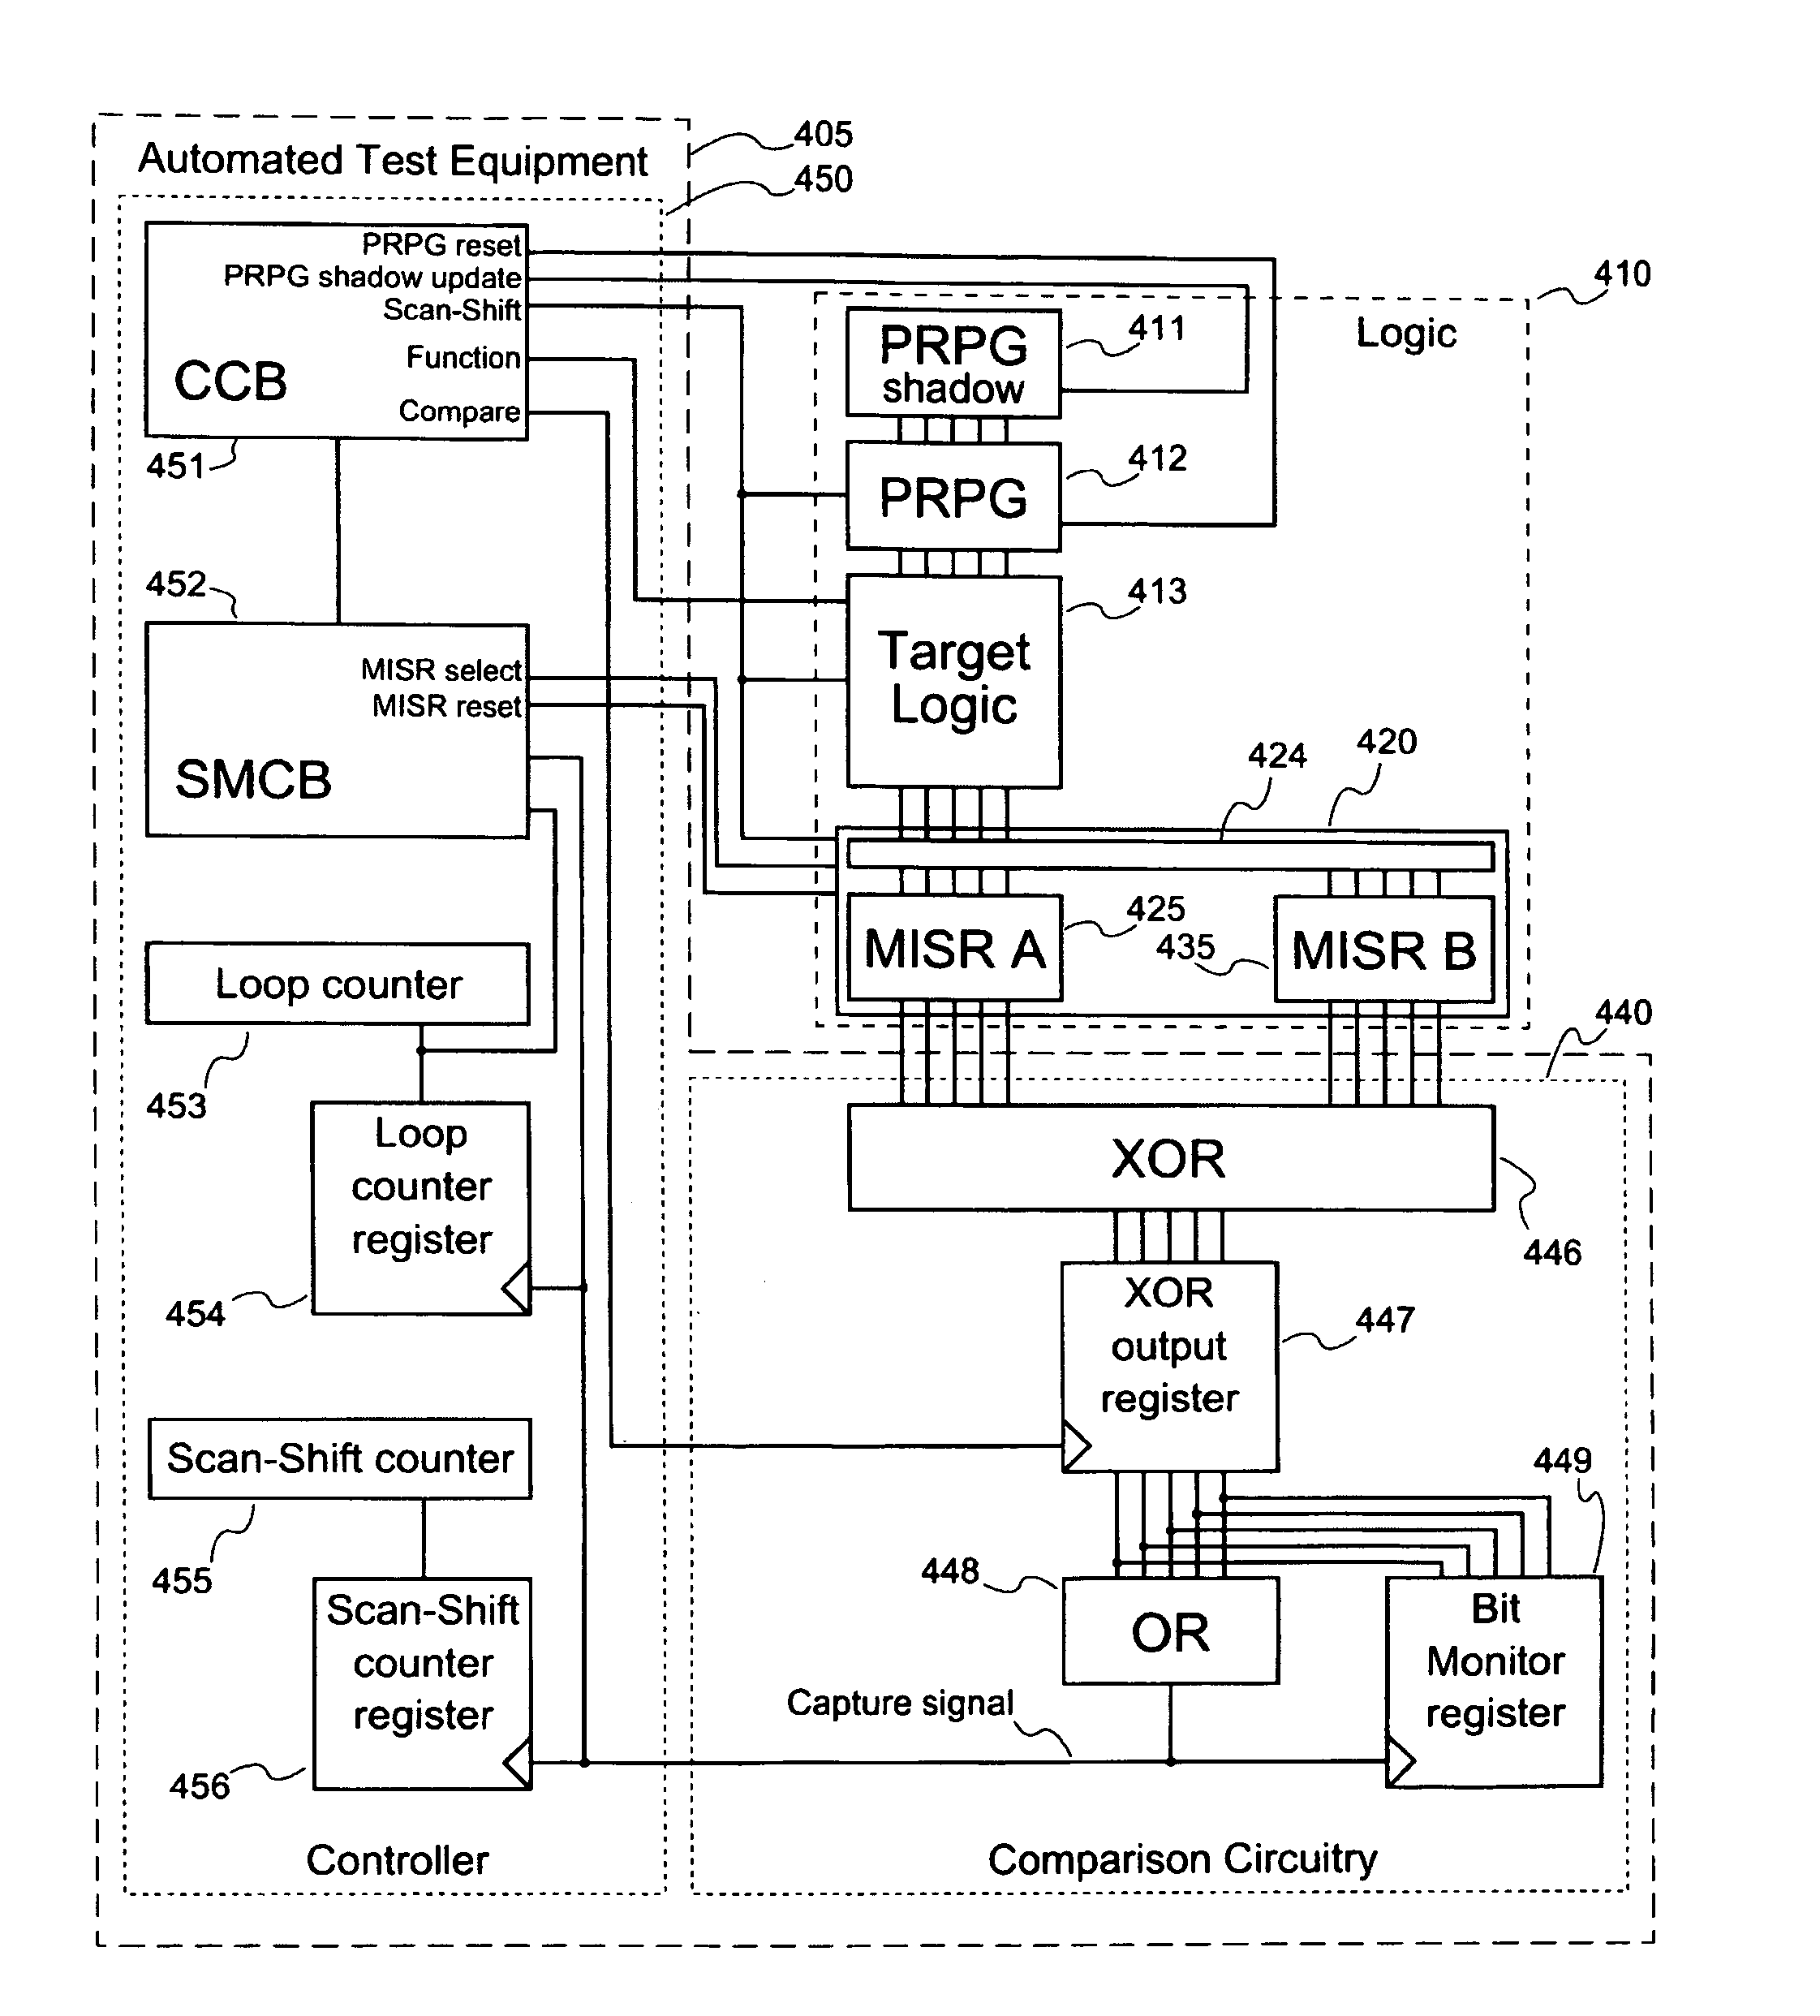 Systems and methods for diagnosing rate dependent errors using LBIST